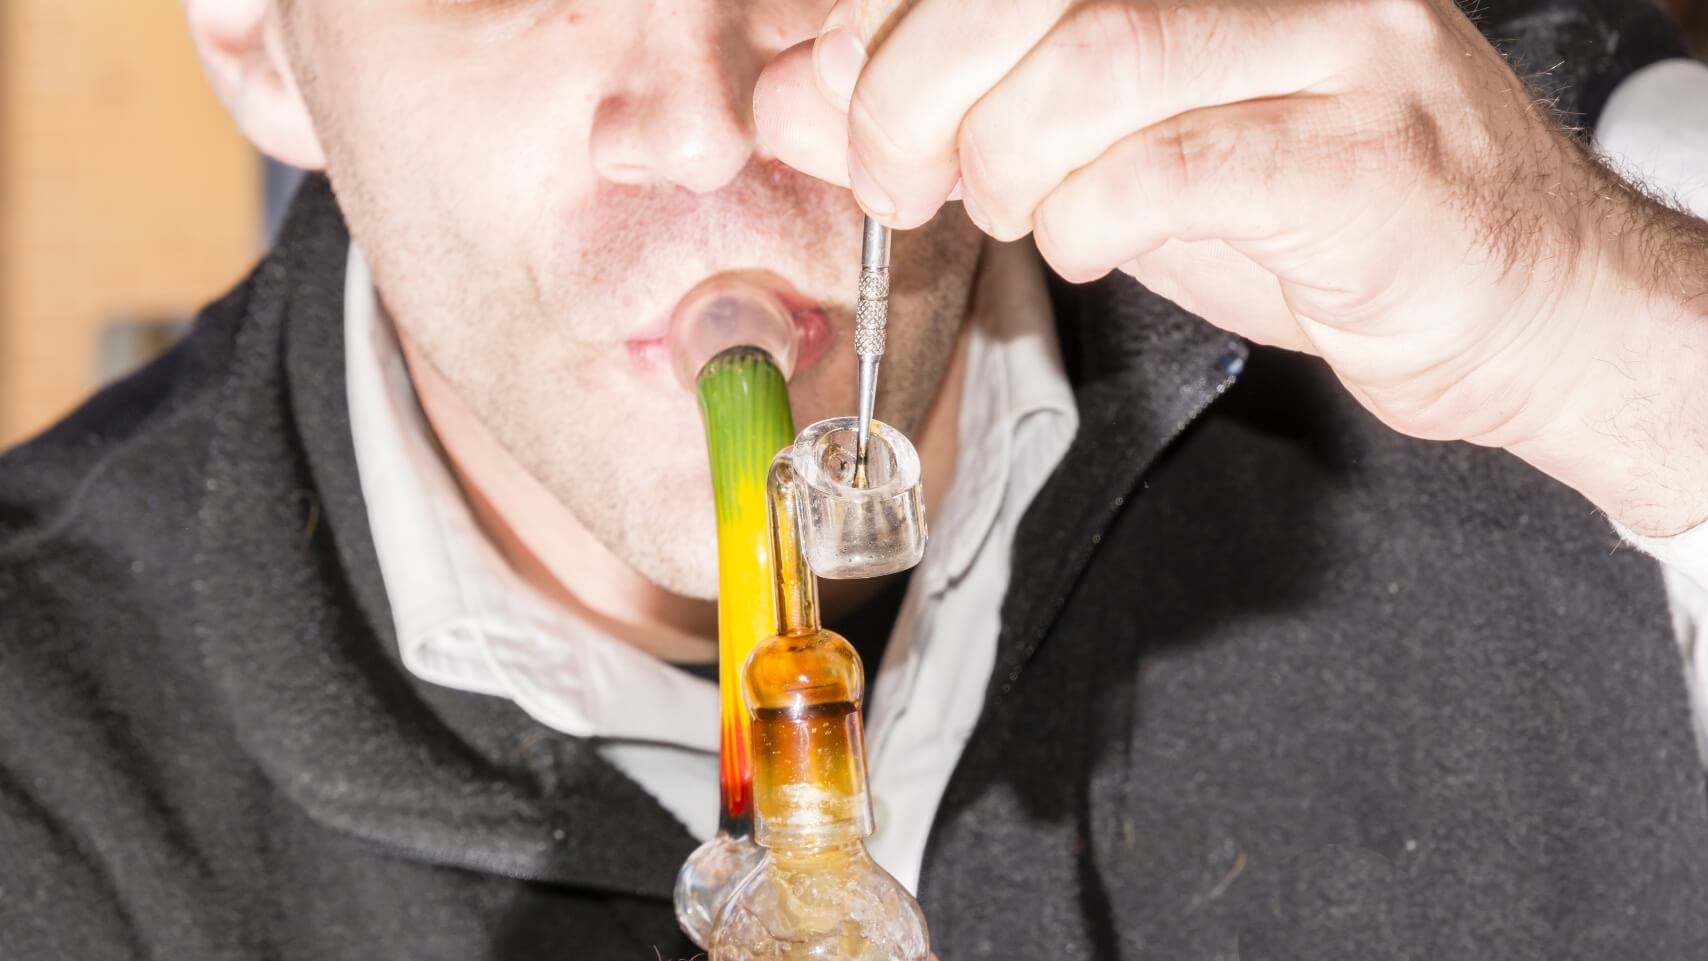 Person inhaling vapor from the dab rig